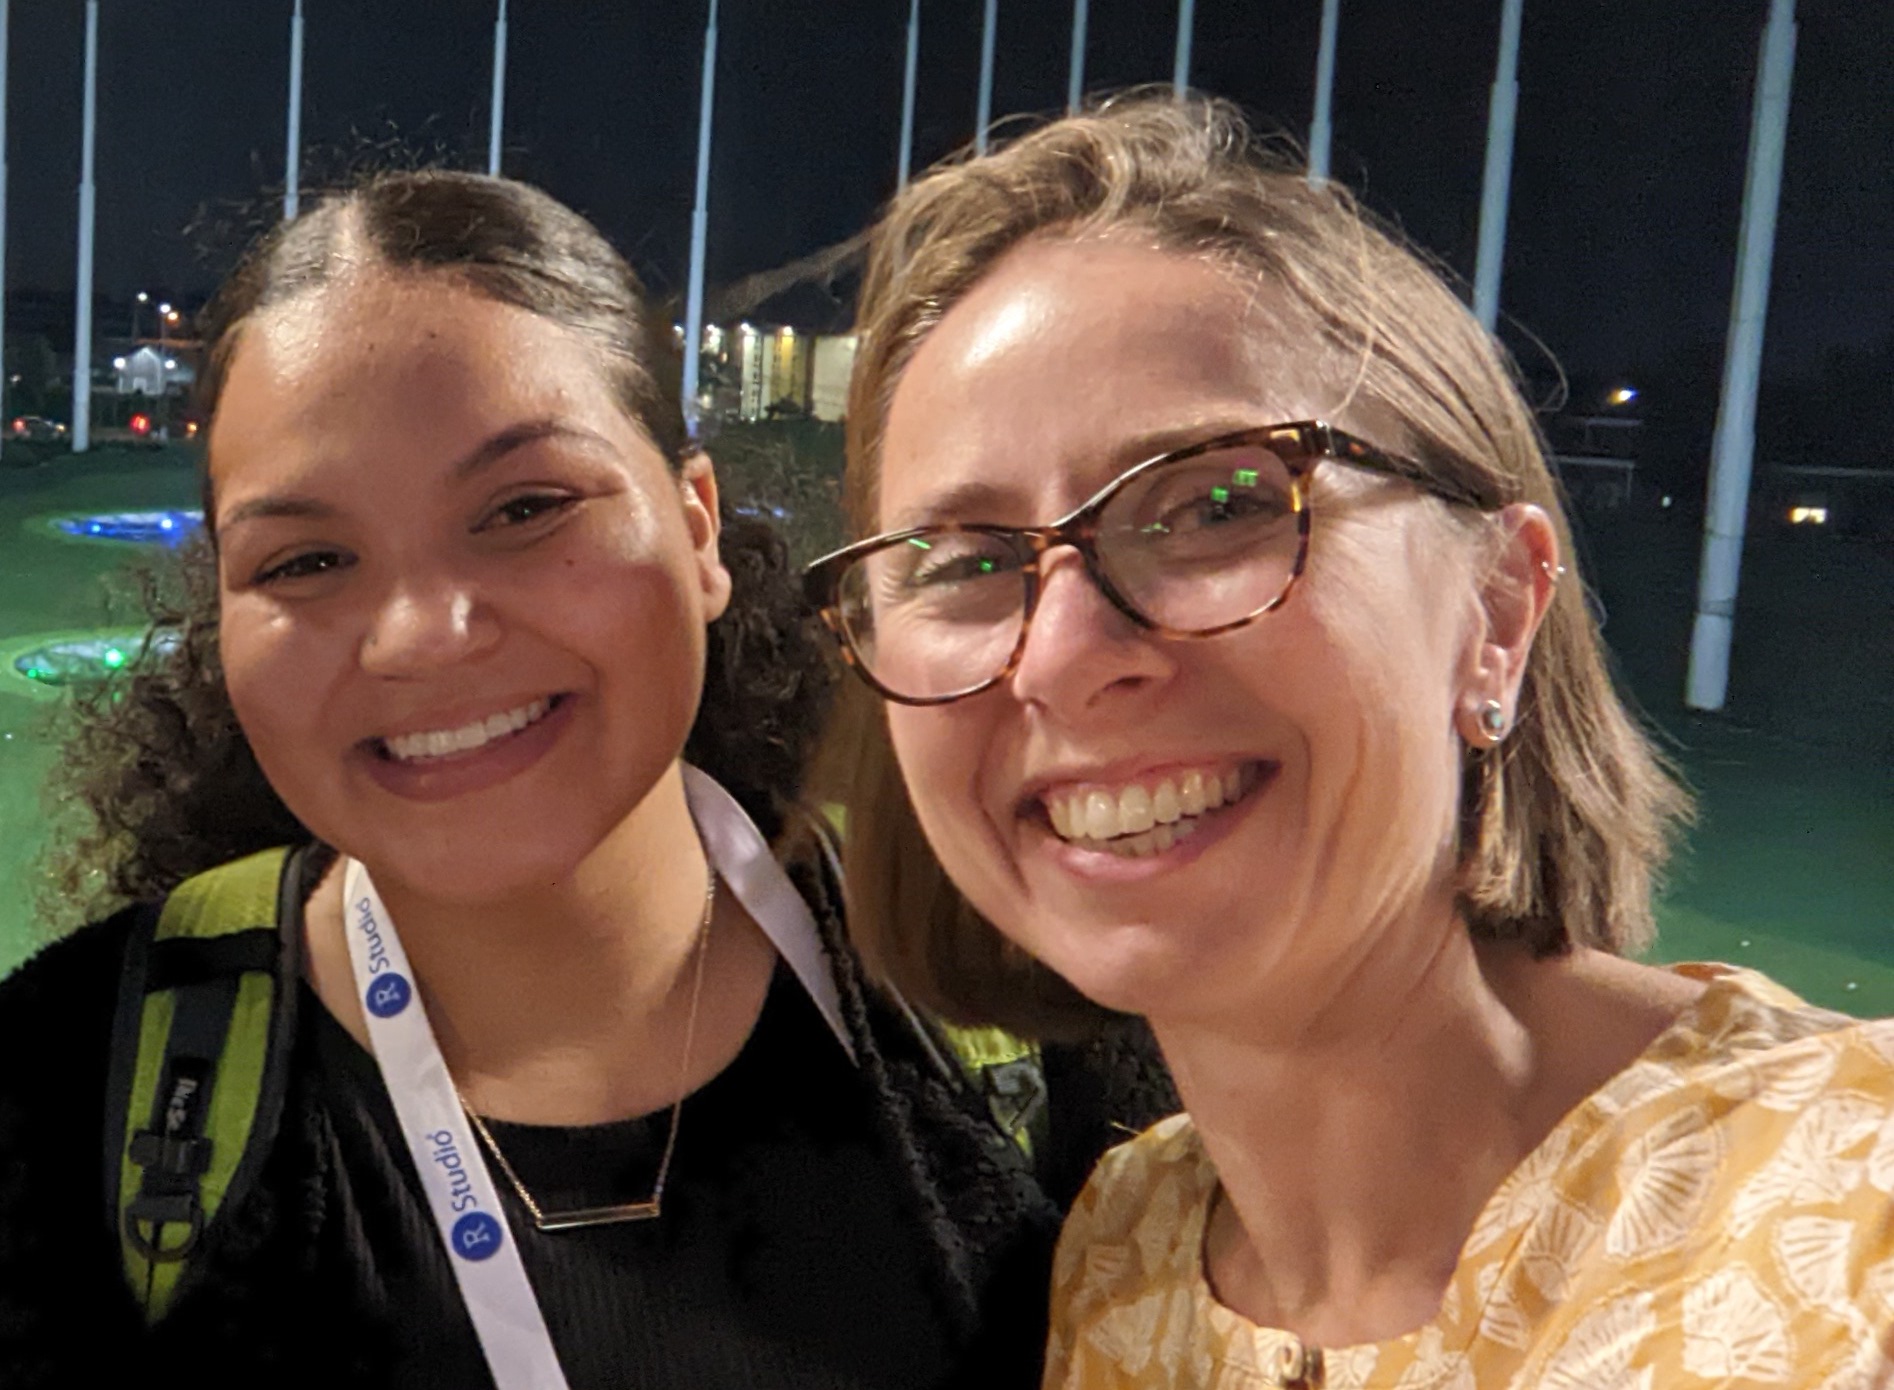 Two women smiling at the camera outside at night. The woman on the left is Black and wearing a black shirt and a lanyard that says RStudio. The woman on the right is white and wearing a yellow shirt and glasses.